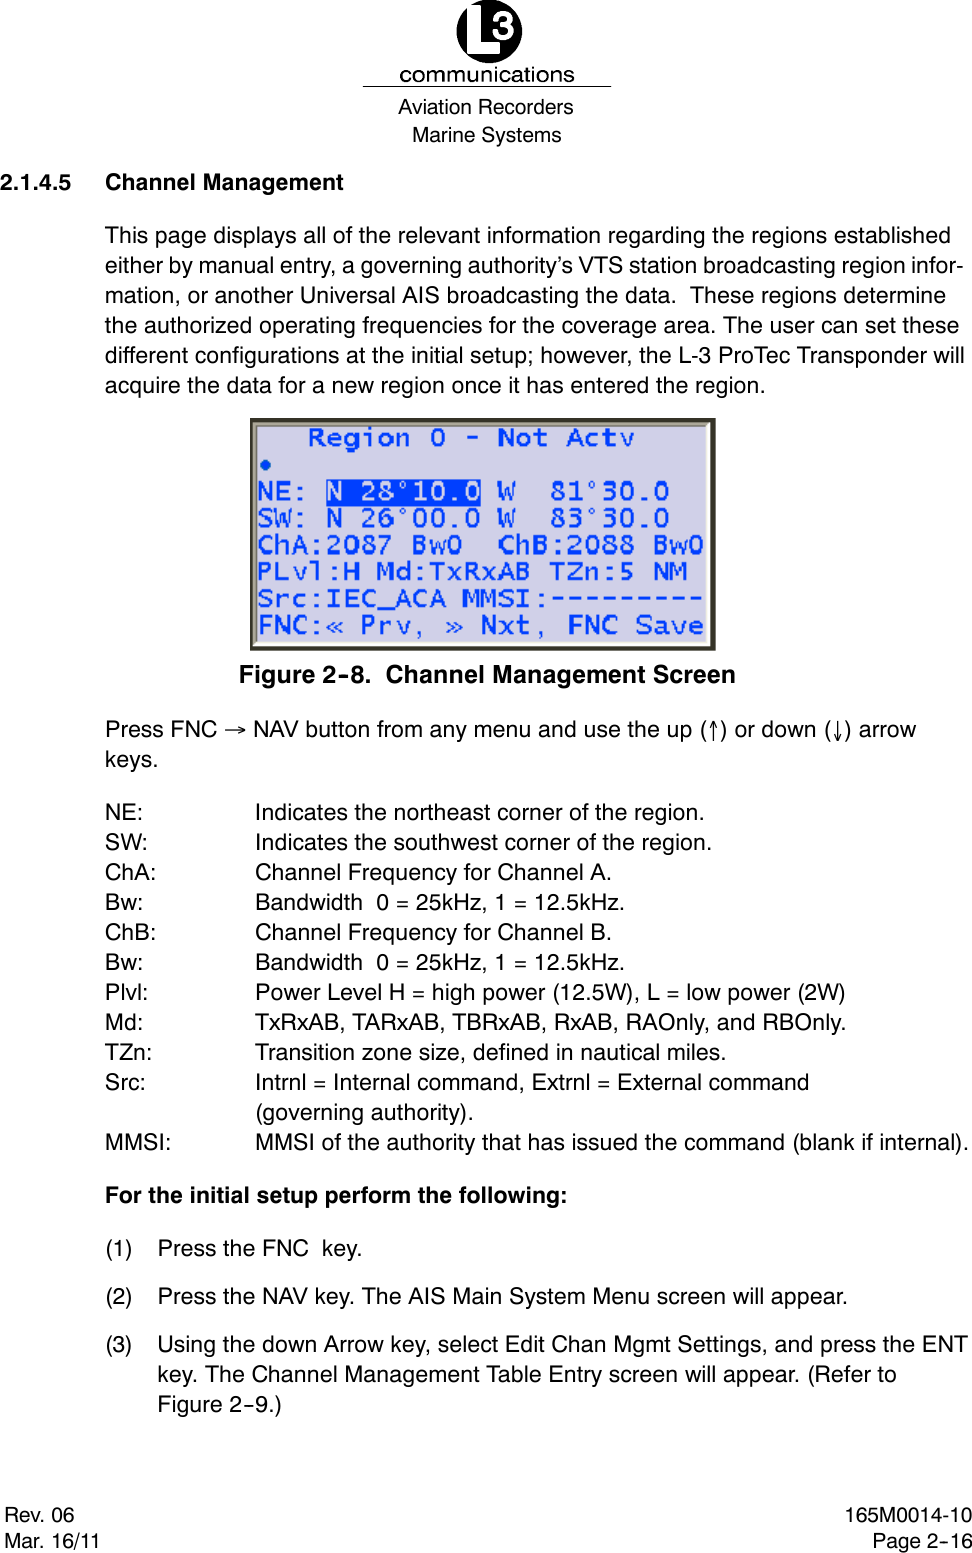 Marine SystemsAviation RecordersRev. 06Mar. 16/11165M0014-10Page 2--162.1.4.5 Channel ManagementThis page displays all of the relevant information regarding the regions establishedeither by manual entry, a governing authority’s VTS station broadcasting region infor-mation, or another Universal AIS broadcasting the data. These regions determinethe authorized operating frequencies for the coverage area. The user can set thesedifferent configurations at the initial setup; however, the L-3 ProTec Transponder willacquire the data for a new region once it has entered the region.Figure 2--8. Channel Management ScreenPress FNC NAV button from any menu and use the up ()ordown() arrowkeys.NE: Indicates the northeast corner of the region.SW: Indicates the southwest corner of the region.ChA: Channel Frequency for Channel A.Bw: Bandwidth 0 = 25kHz, 1 = 12.5kHz.ChB: Channel Frequency for Channel B.Bw: Bandwidth 0 = 25kHz, 1 = 12.5kHz.Plvl: Power Level H = high power (12.5W), L = low power (2W)Md: TxRxAB, TARxAB, TBRxAB, RxAB, RAOnly, and RBOnly.TZn: Transition zone size, defined in nautical miles.Src: Intrnl = Internal command, Extrnl = External command(governing authority).MMSI: MMSI of the authority that has issued the command (blank if internal).For the initial setup perform the following:(1) Press the FNC key.(2) Press the NAV key. The AIS Main System Menu screen will appear.(3) Using the down Arrow key, select Edit Chan Mgmt Settings, and press the ENTkey. The Channel Management Table Entry screen will appear. (Refer toFigure 2--9.)